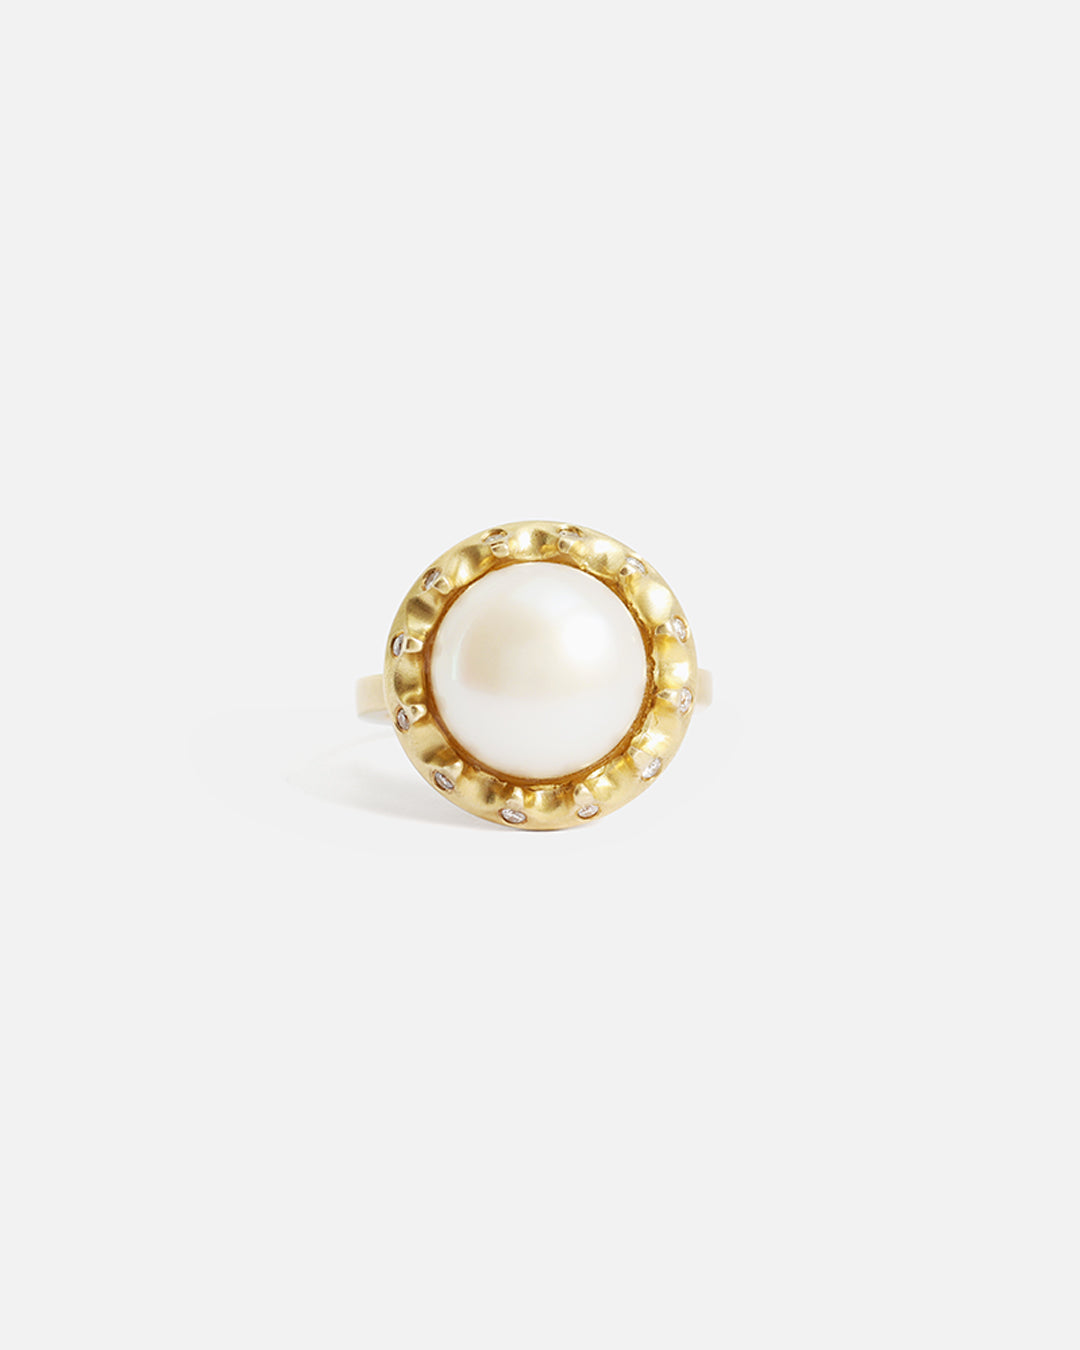 Pearl & Diamond / Ring By Tricia Kirkland in Engagement Rings Category